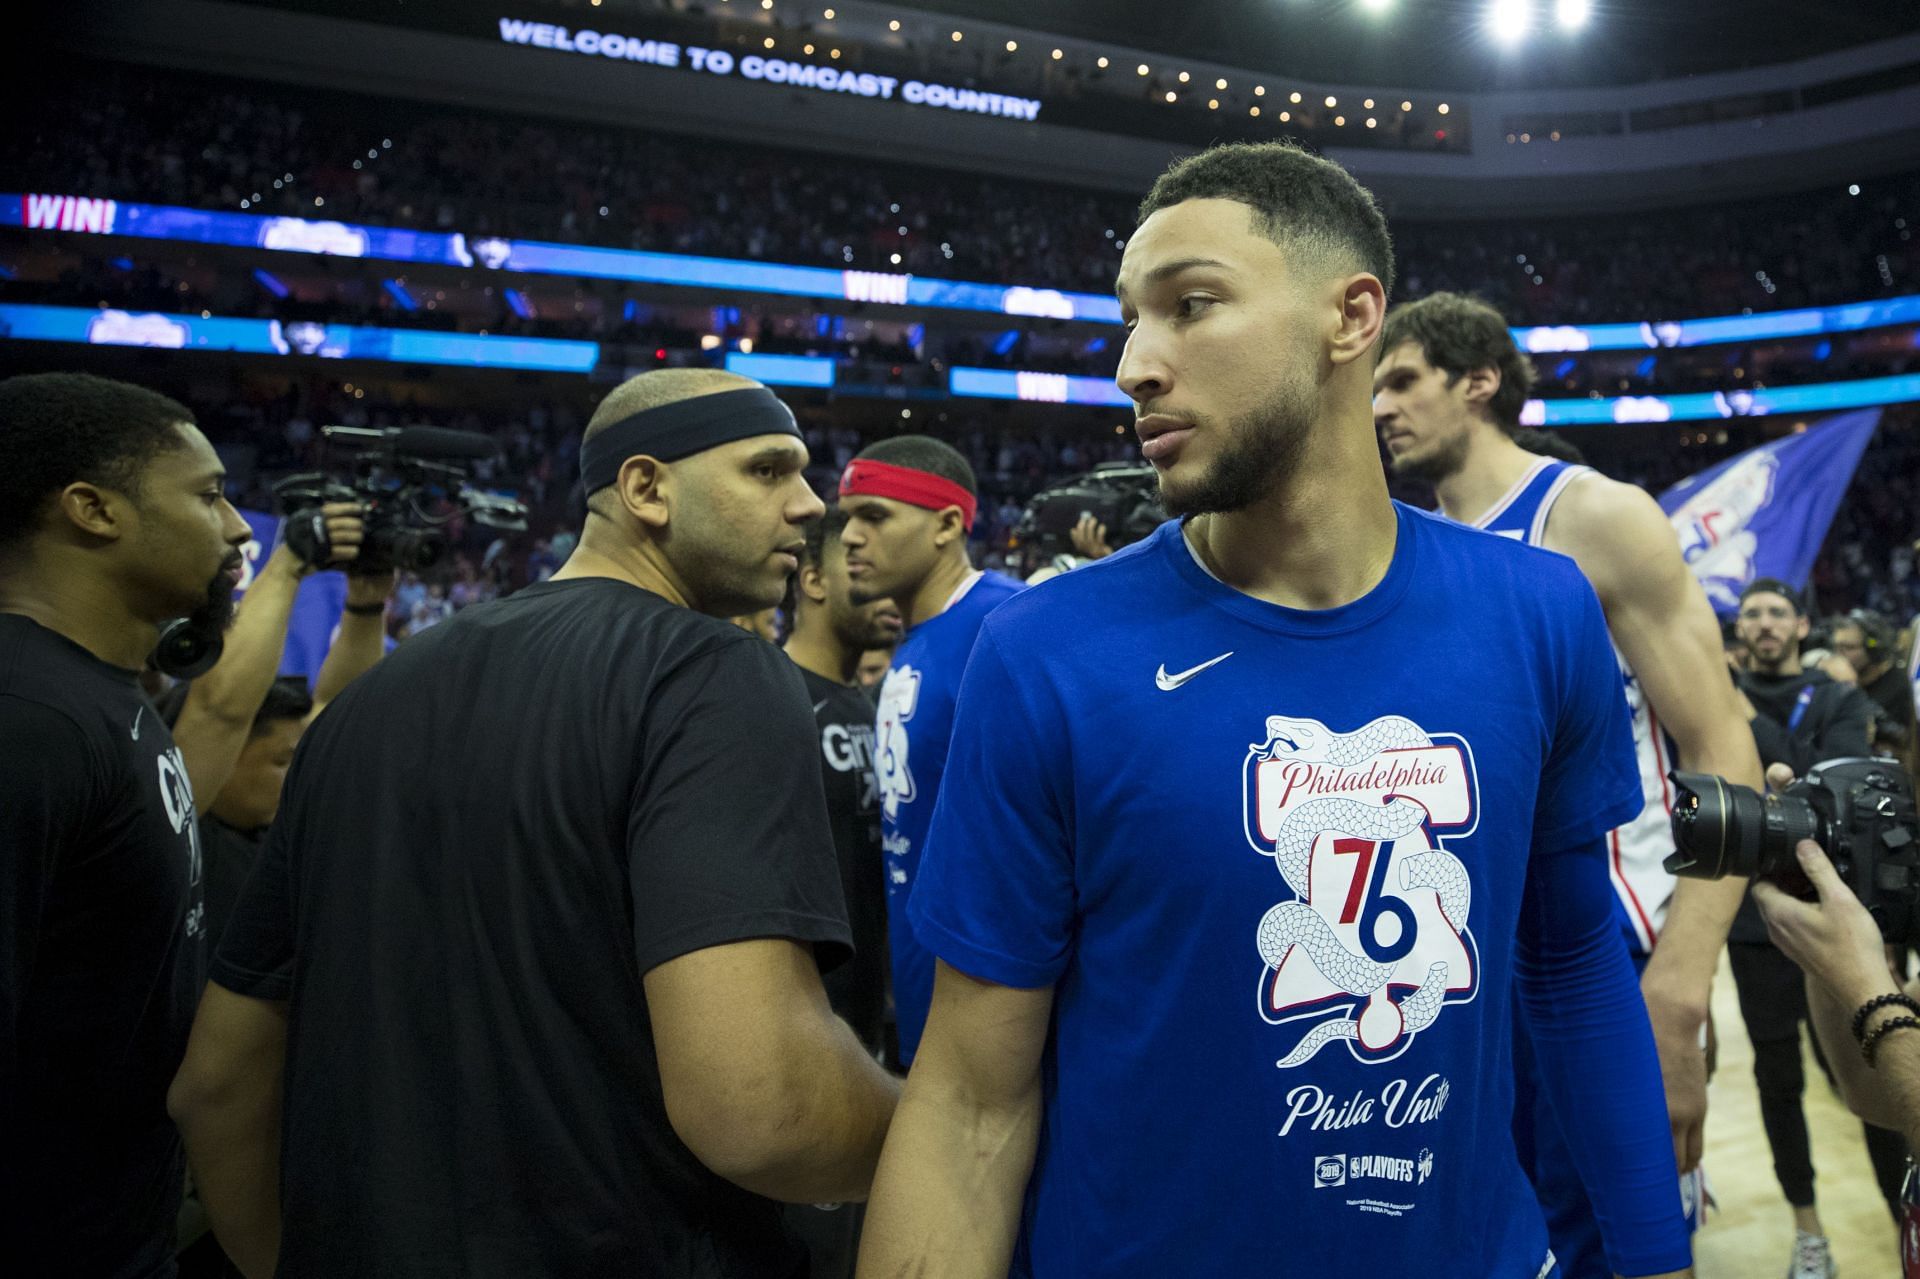 Ben Simmons was finally traded to the Brooklyn Nets after months of uncertainty